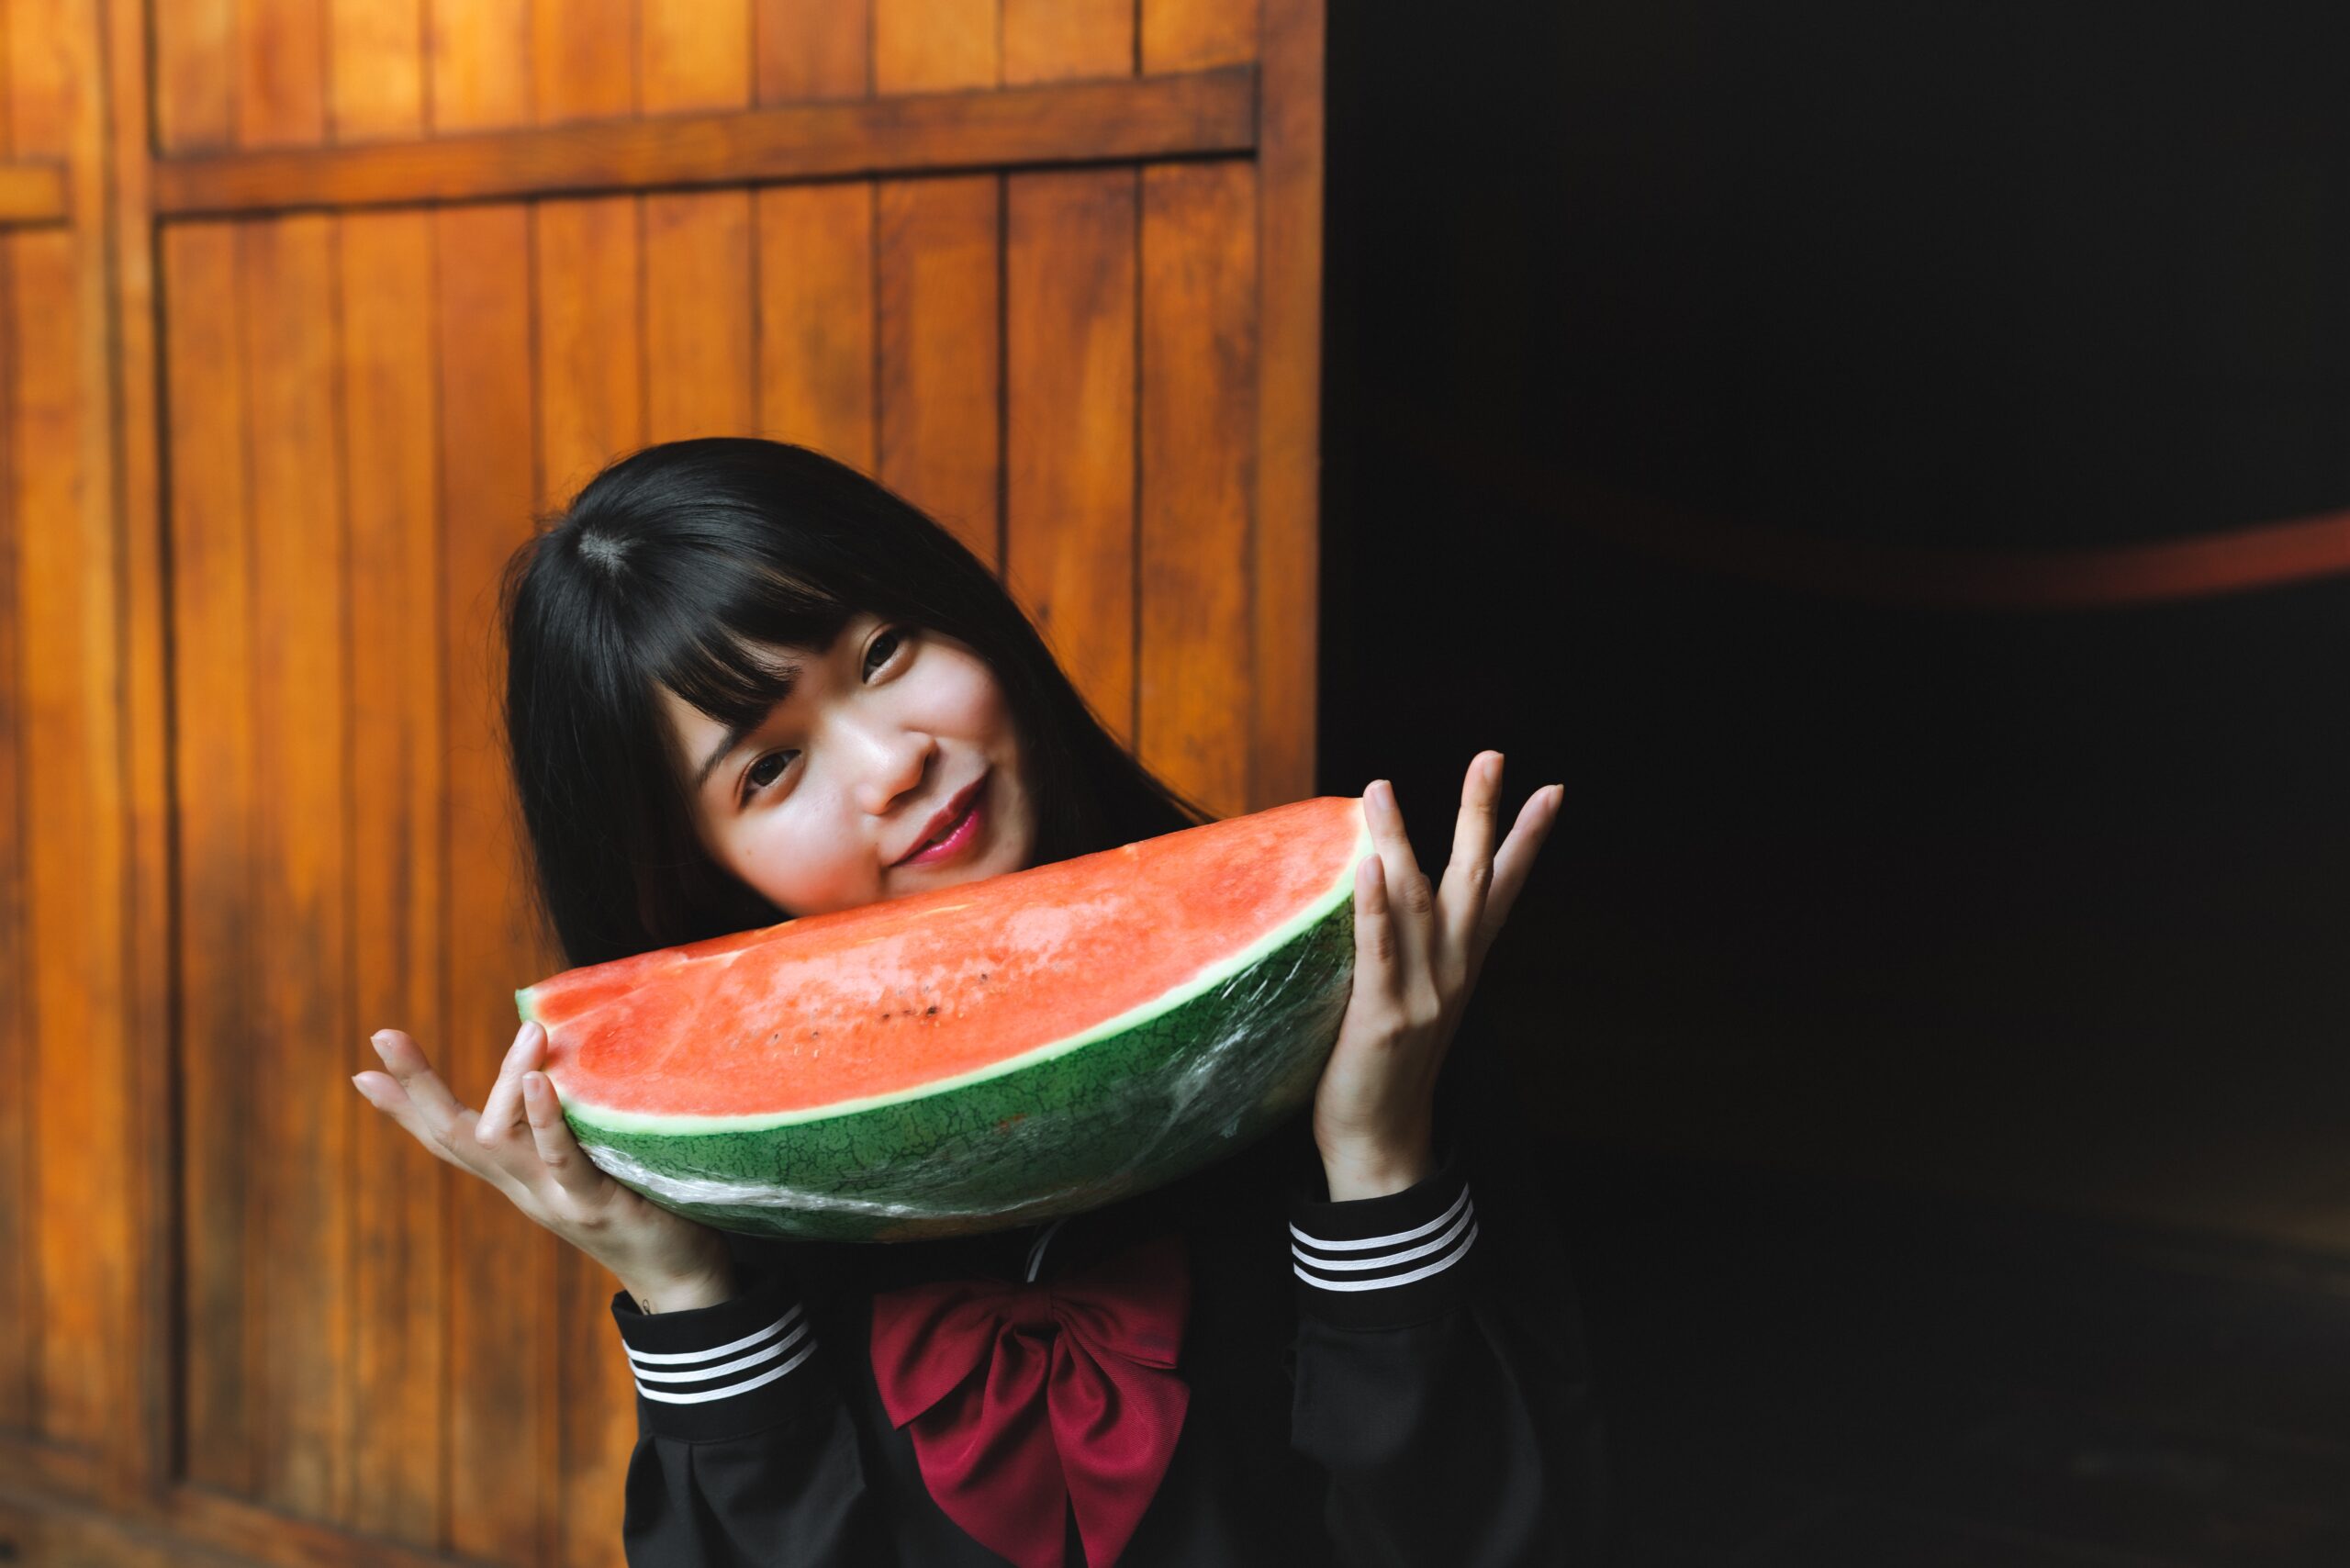 Watermelon Fruit for Weight lose